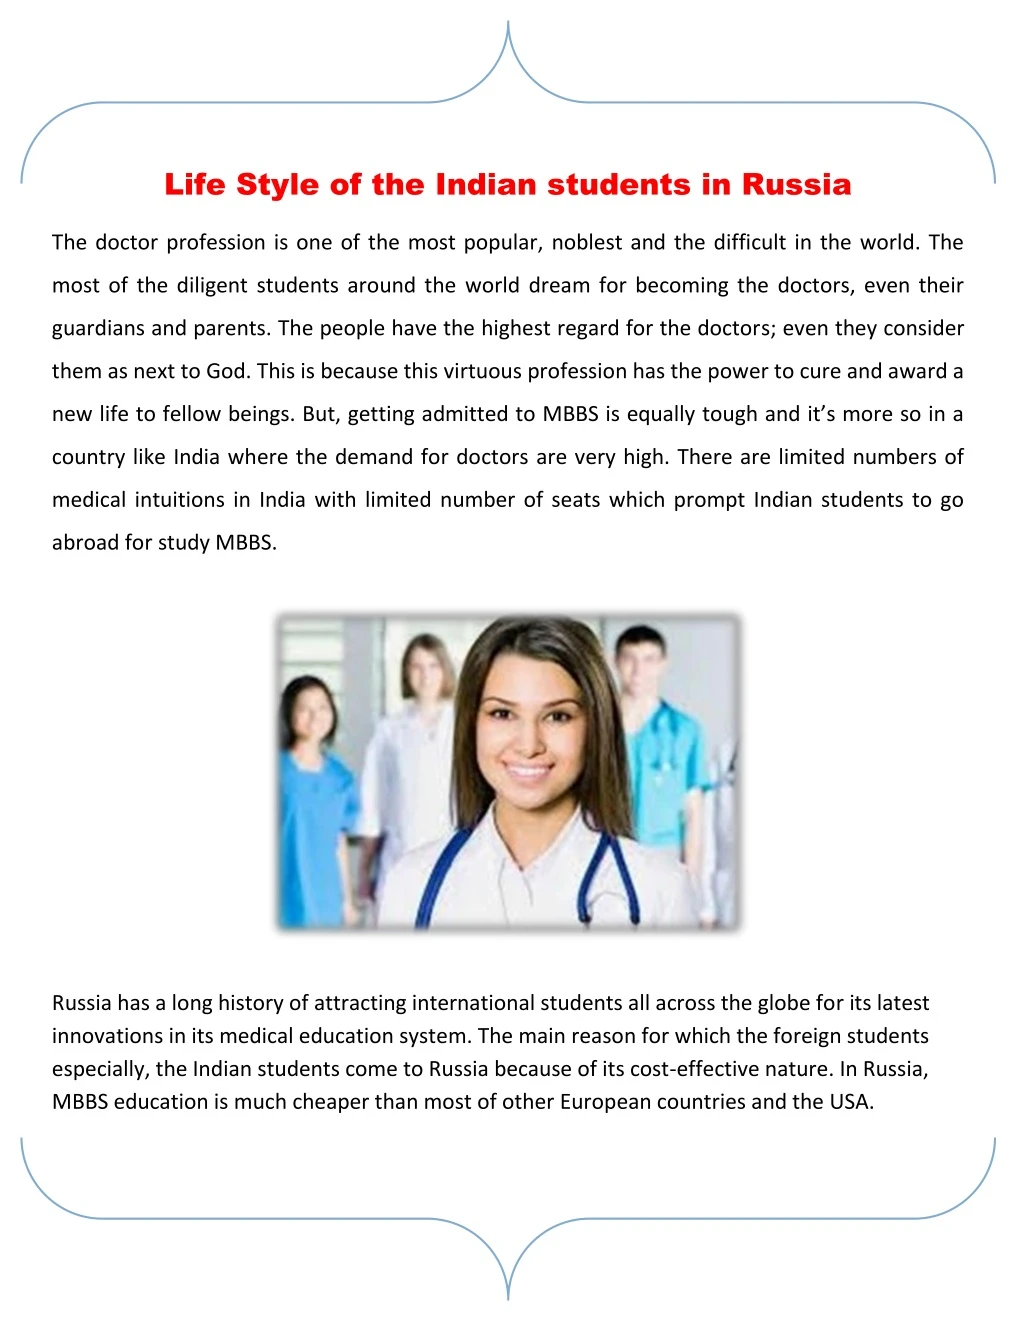 life style of the indian students in russia